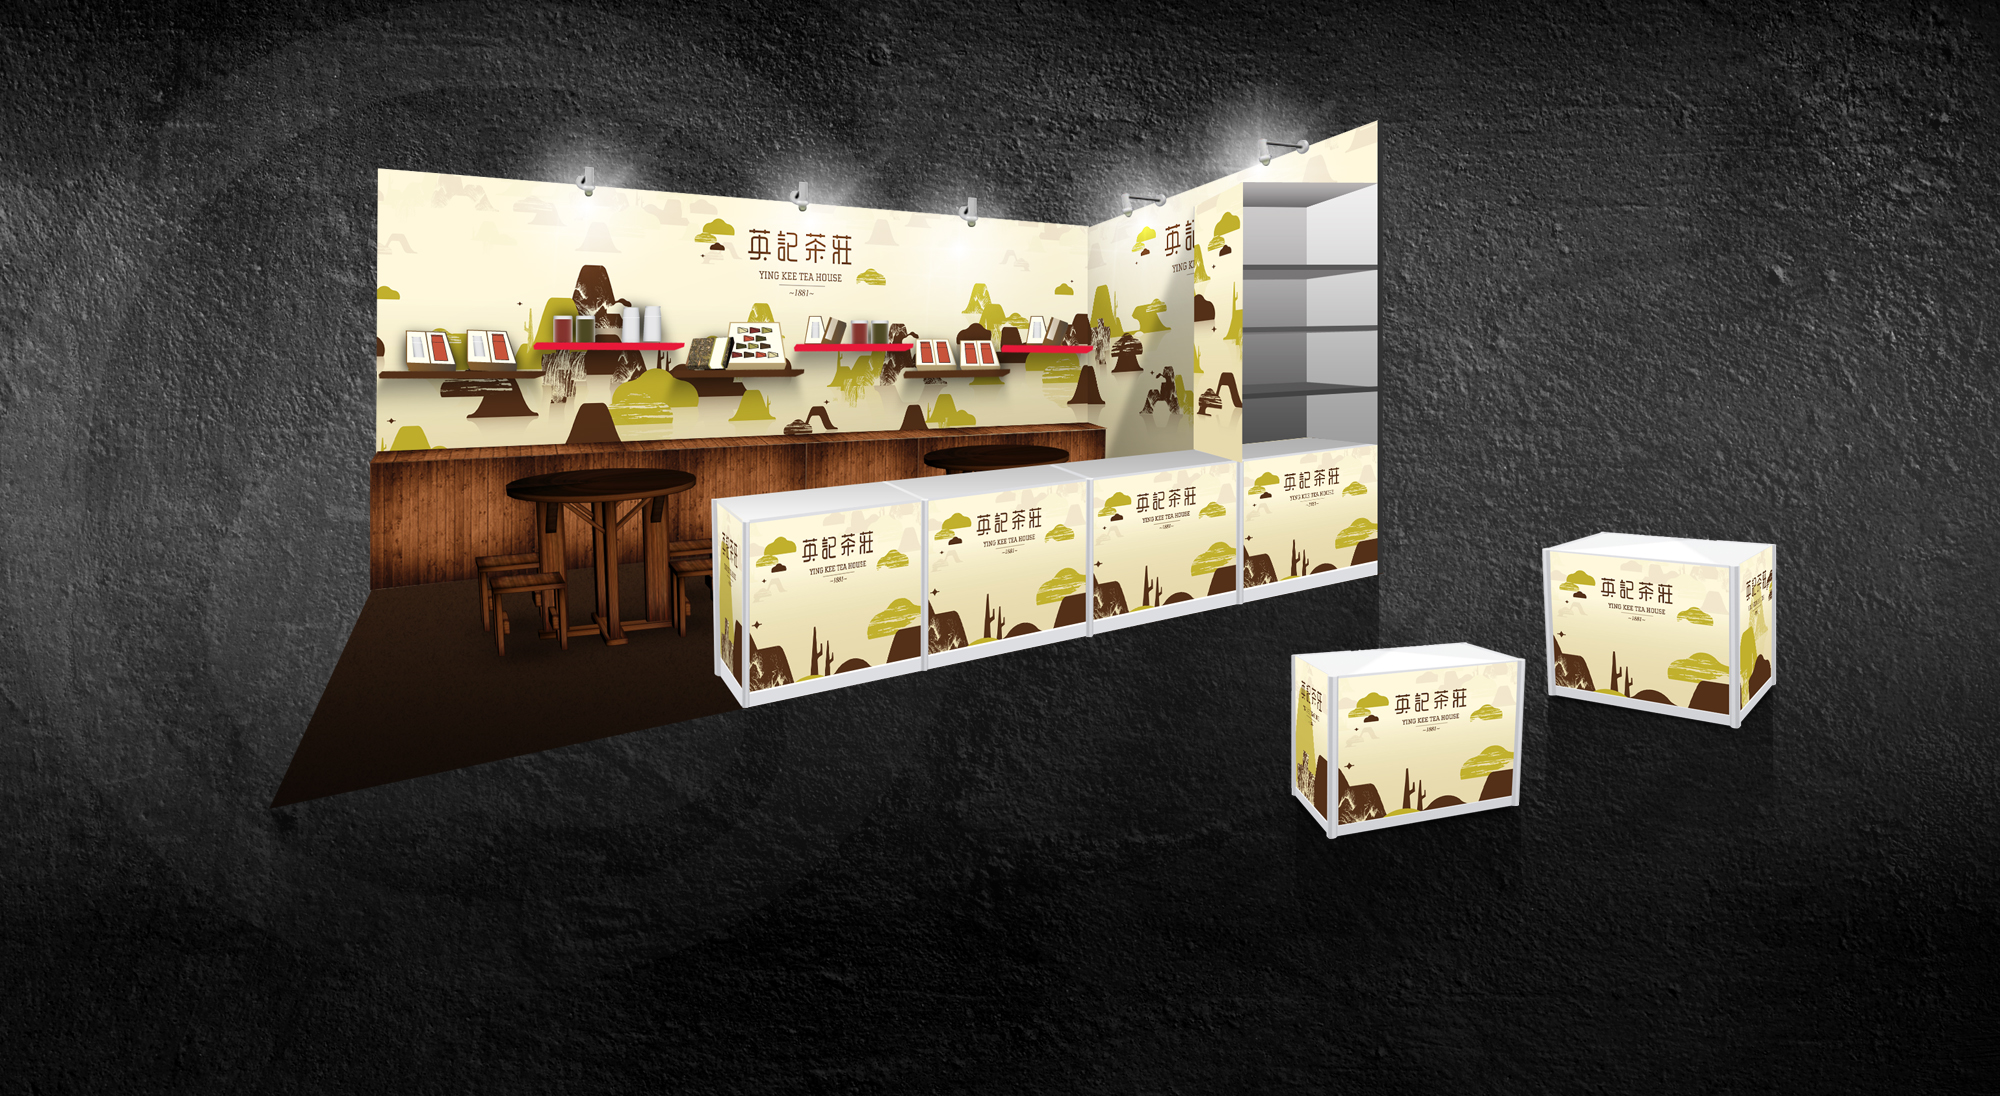 Ying Kee Tea House - Standard Booth Design